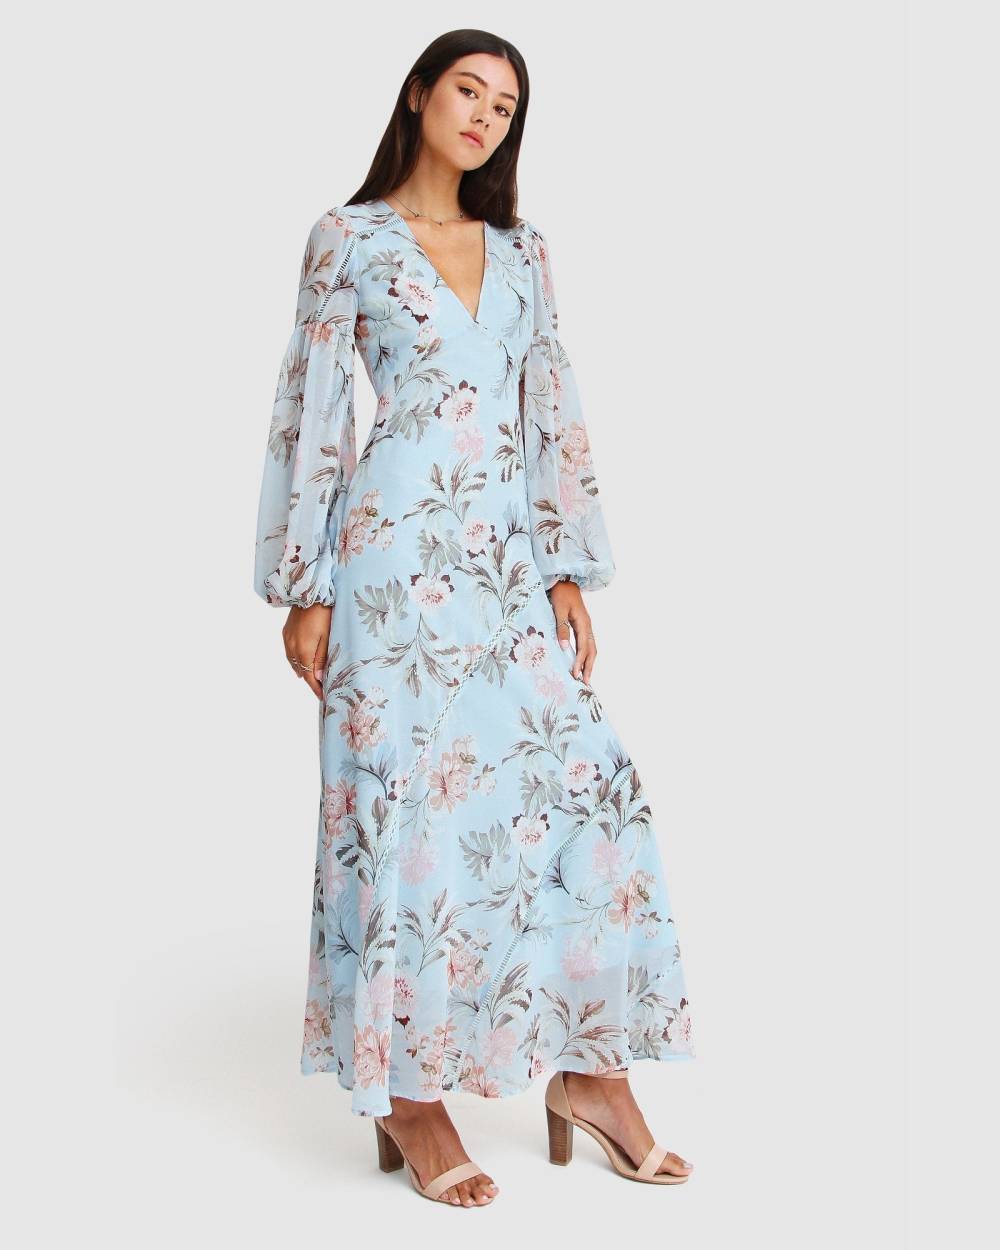 Belle & Bloom In your dreams robe maxi